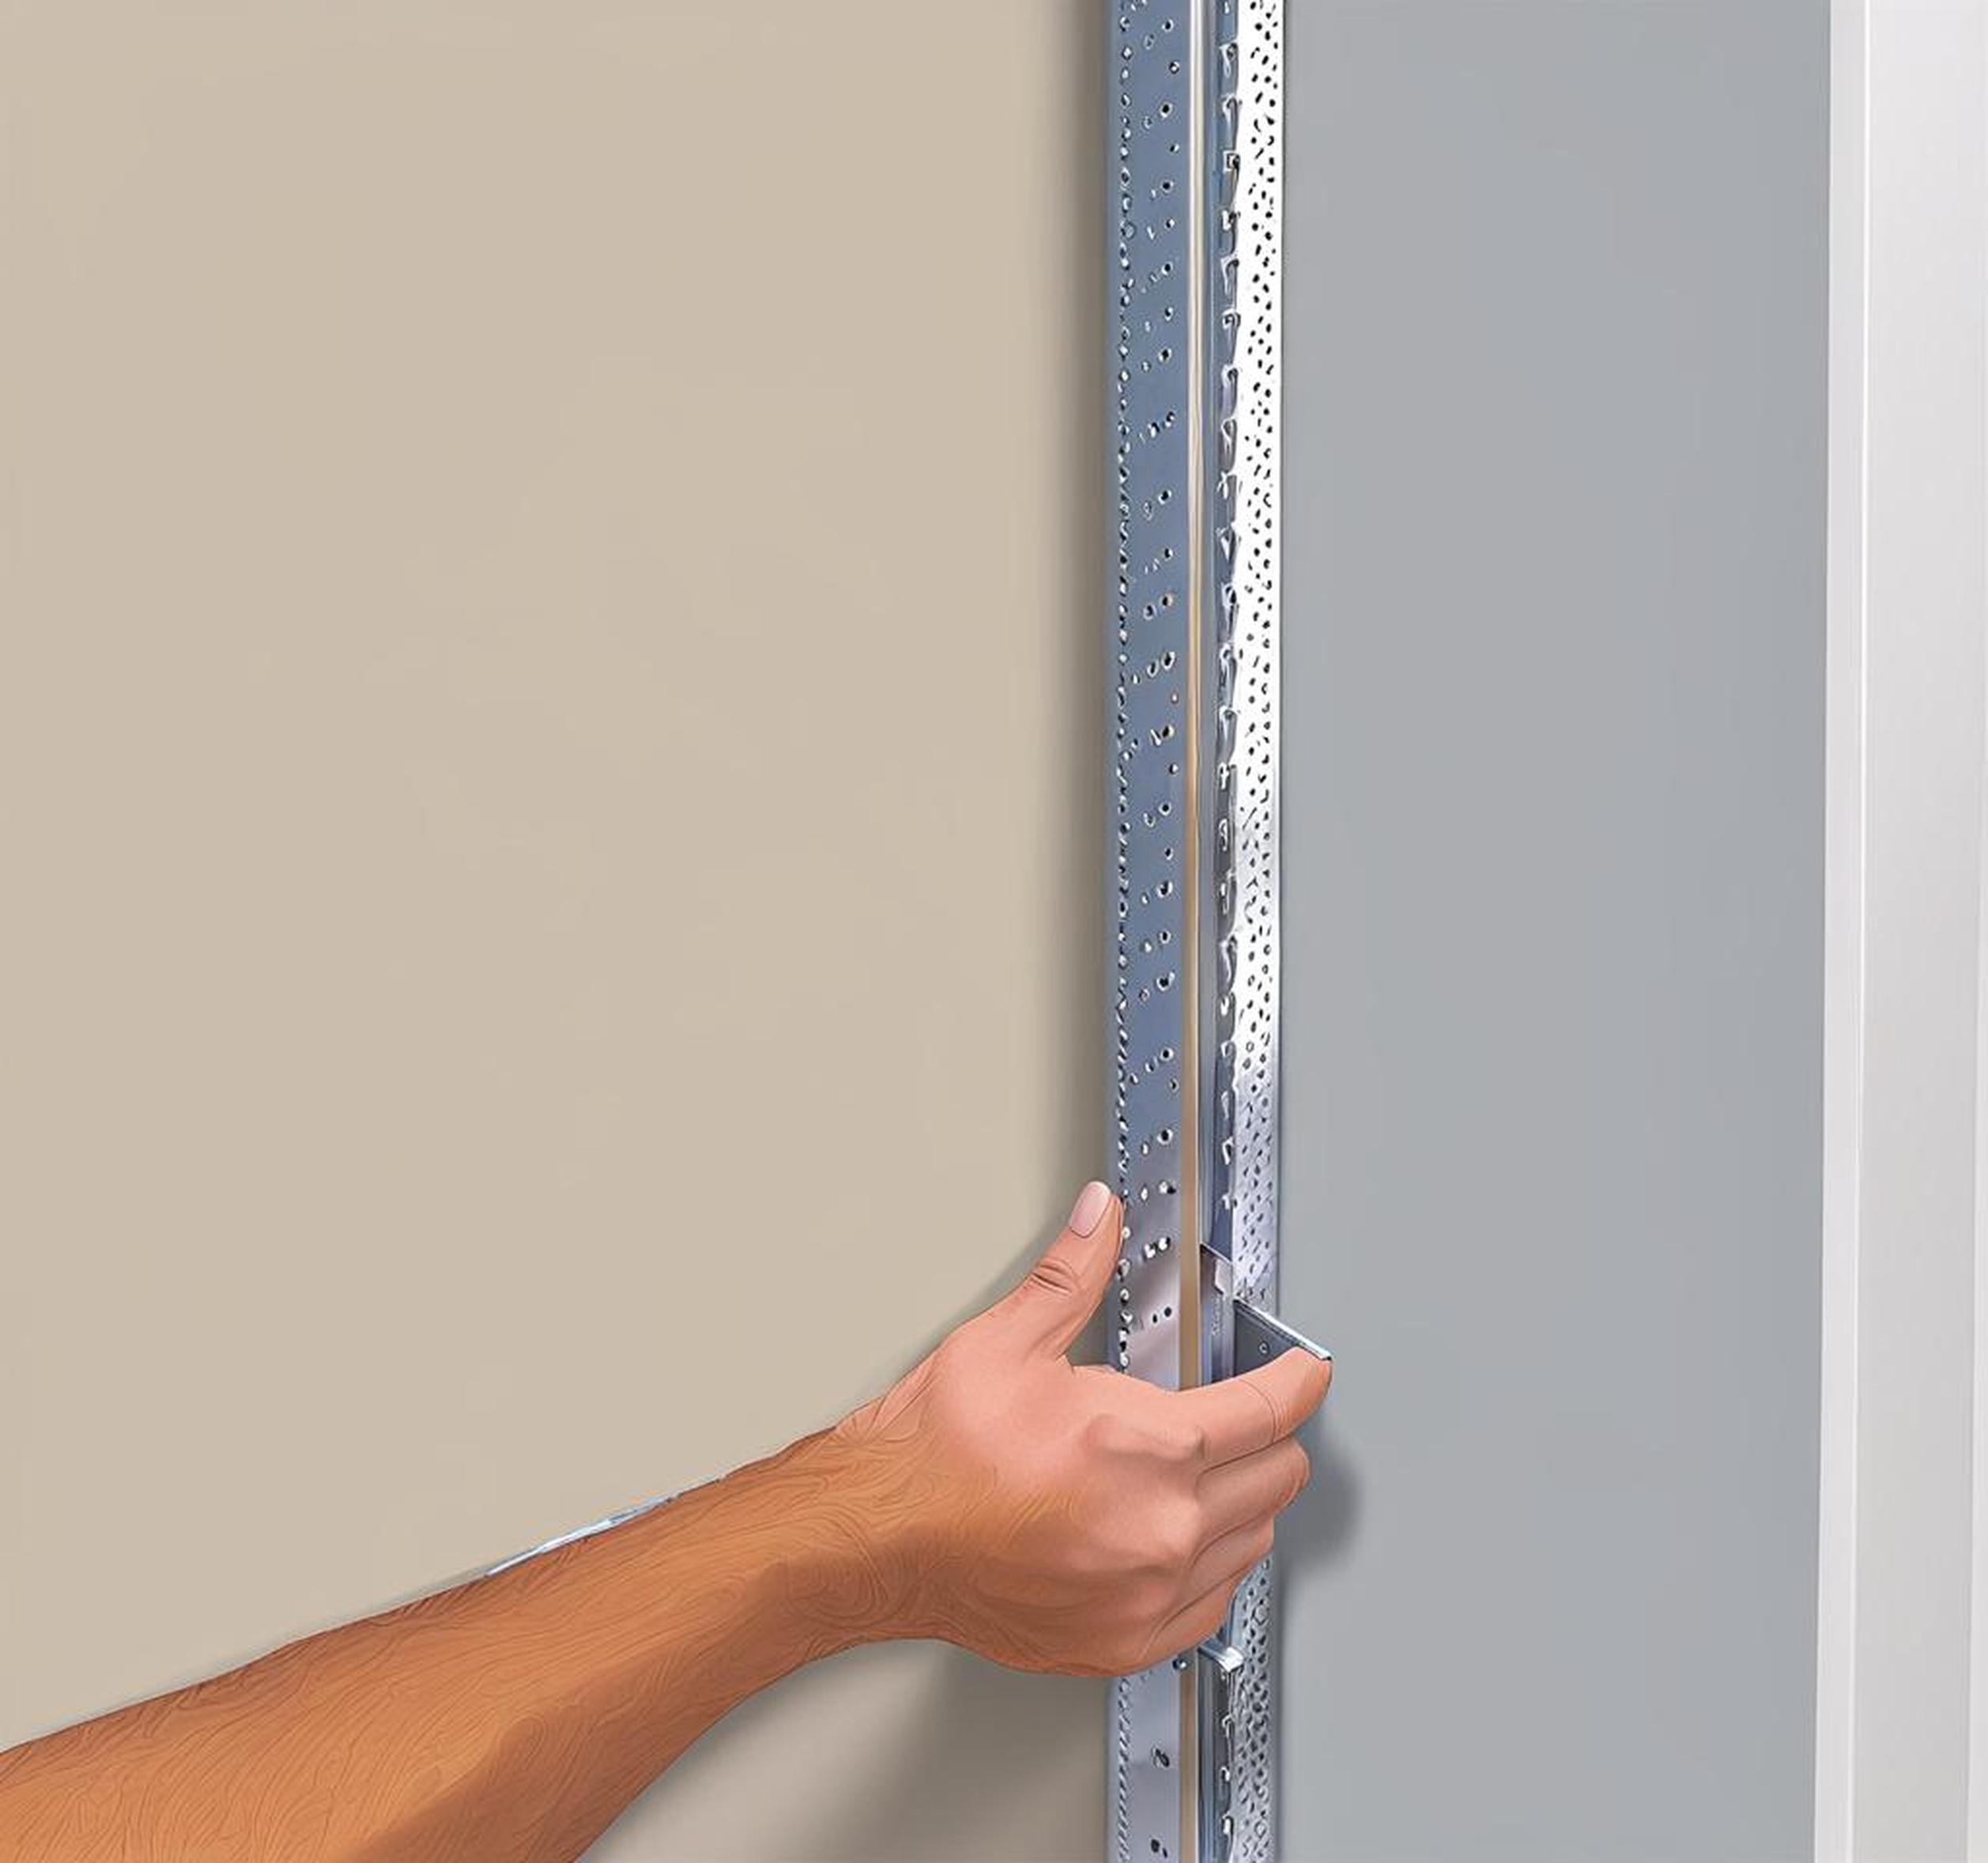 types of corner beads for drywall